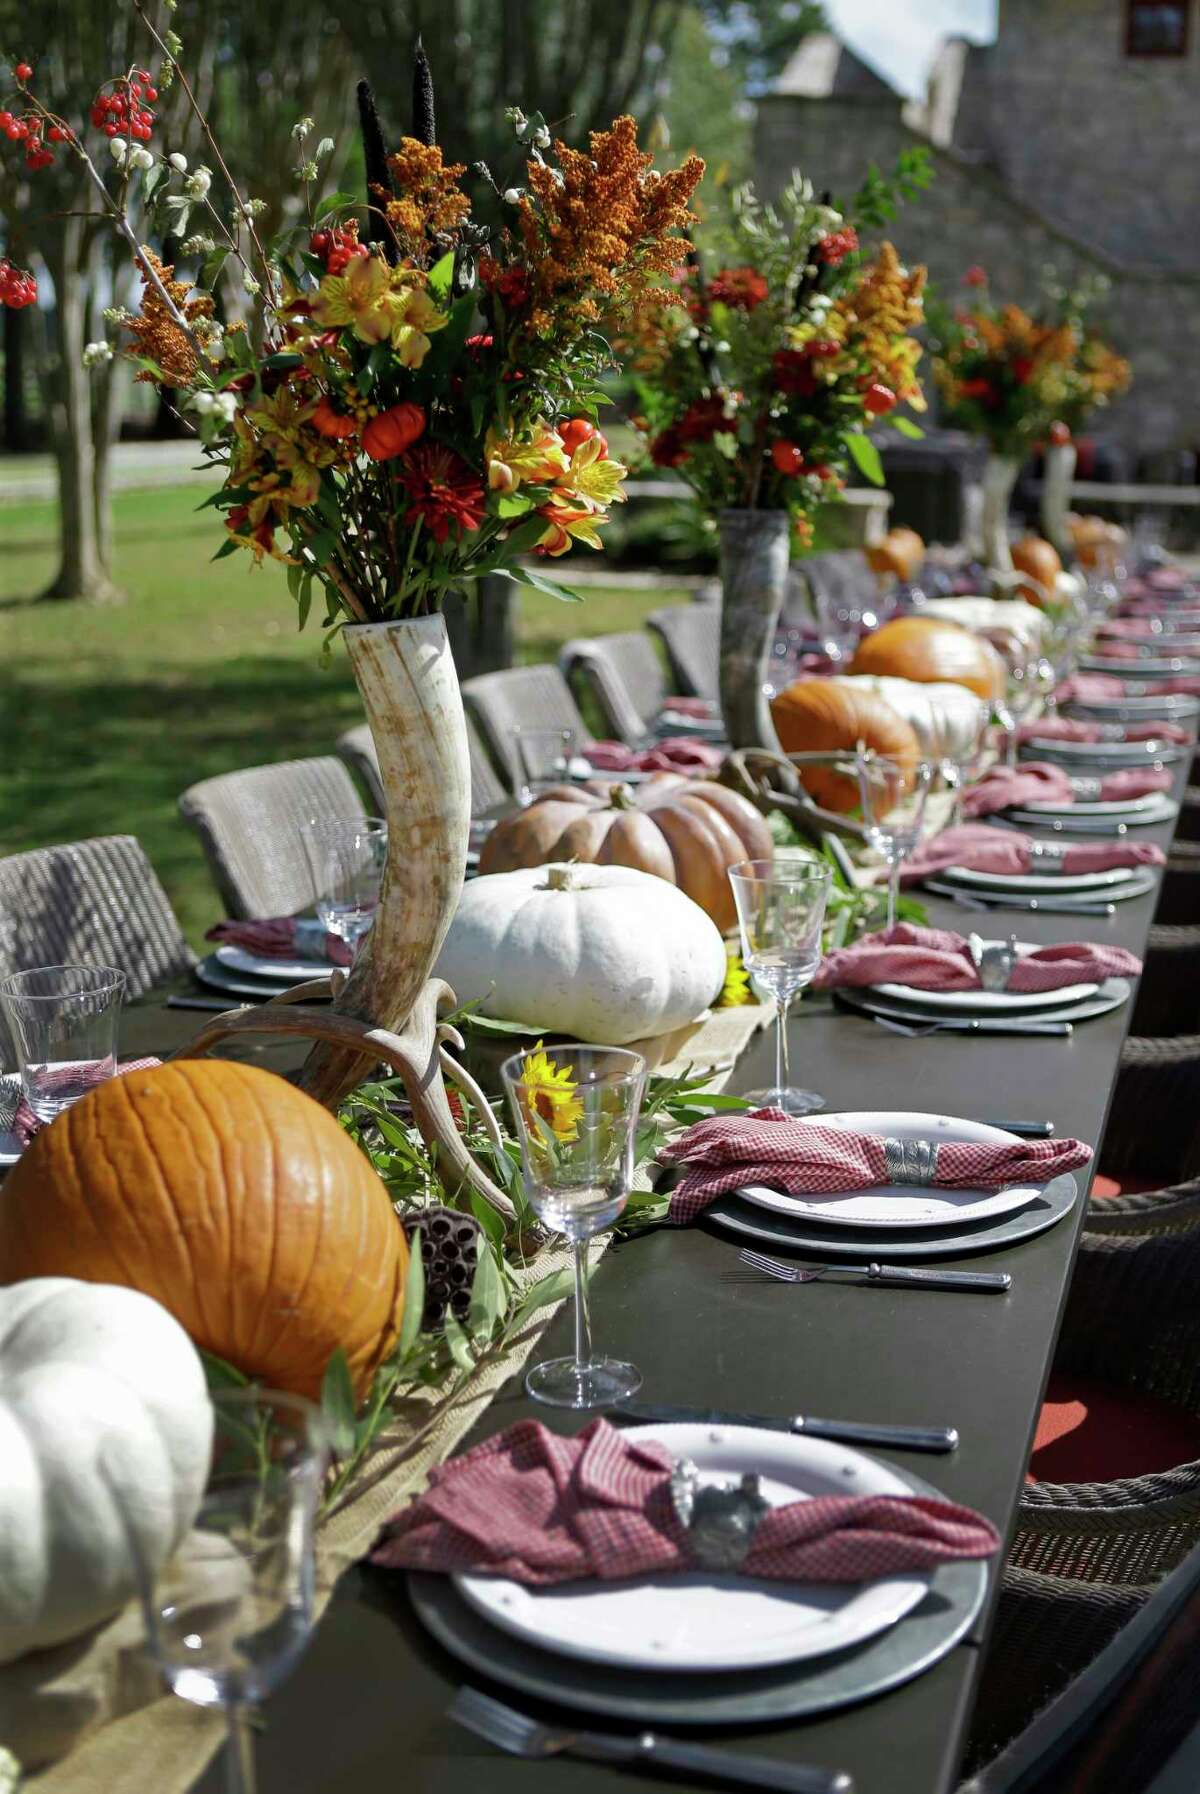 Lucas-Eilers Design Associates designed an outdoor tablescape for 28 using pumpkins, gourds, antlers and tall, skinny vases holding a bouquets of fall colors above the crowd. Tableware courtesy of Kuhl-Linscomb.